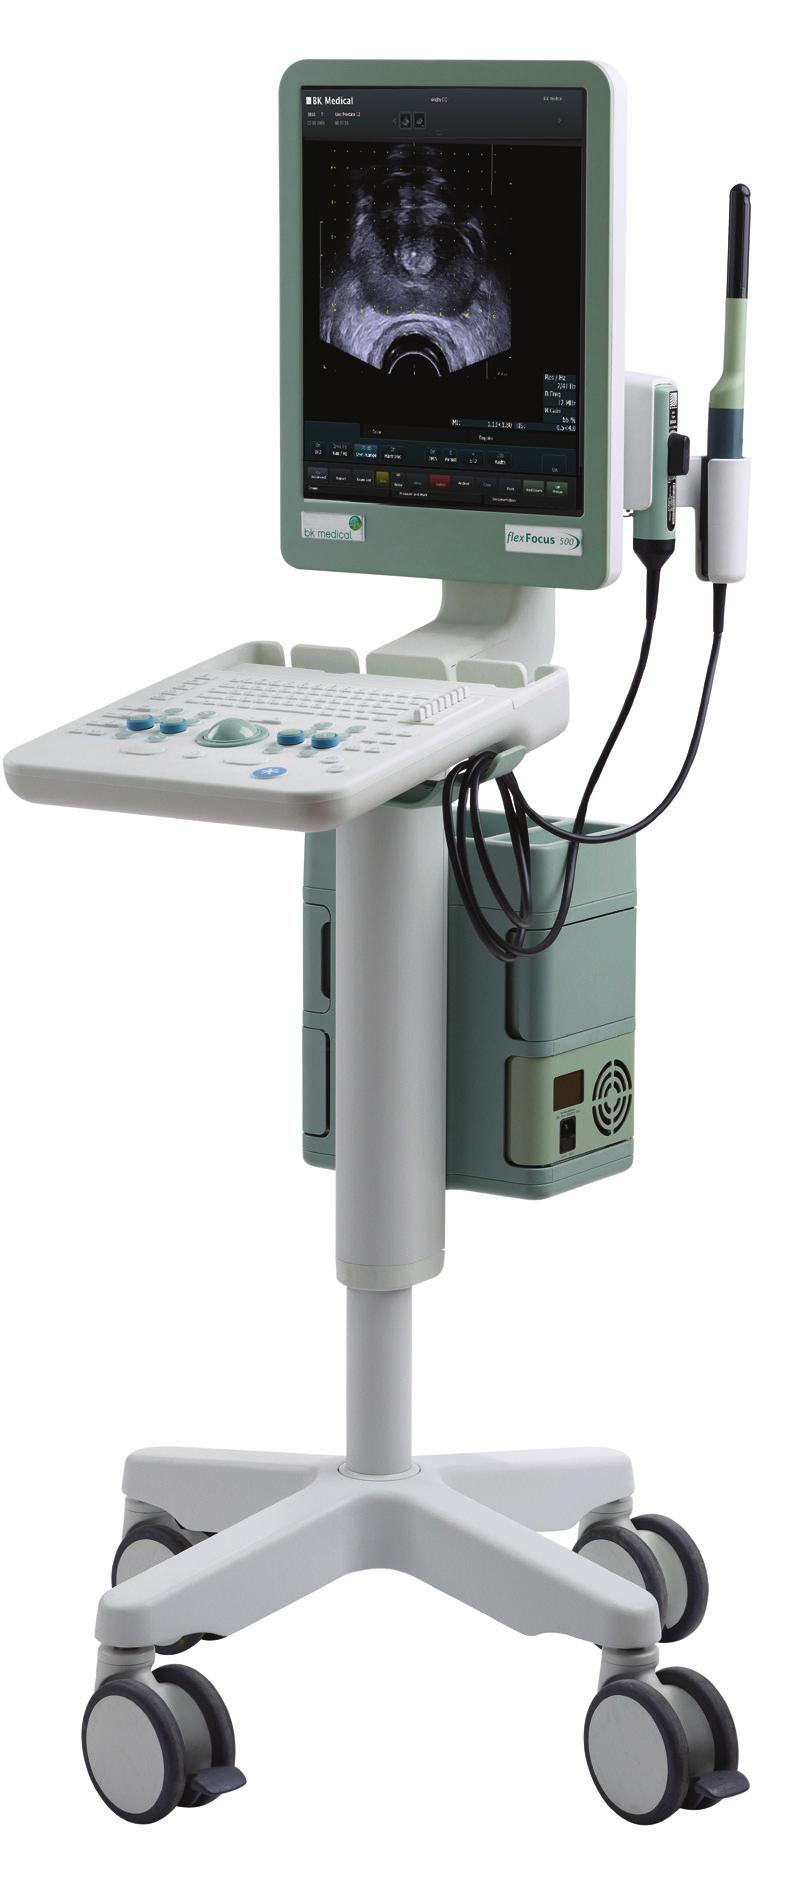 TRANSRECTAL ULTRASOUND-GUIDED PROSTATE BRACHYTHERAPY 6 FLEX FOCUS FOR ULTRASOUND GUIDANCE Our BK products are the market leaders for ultrasound-guided brachytherapy.